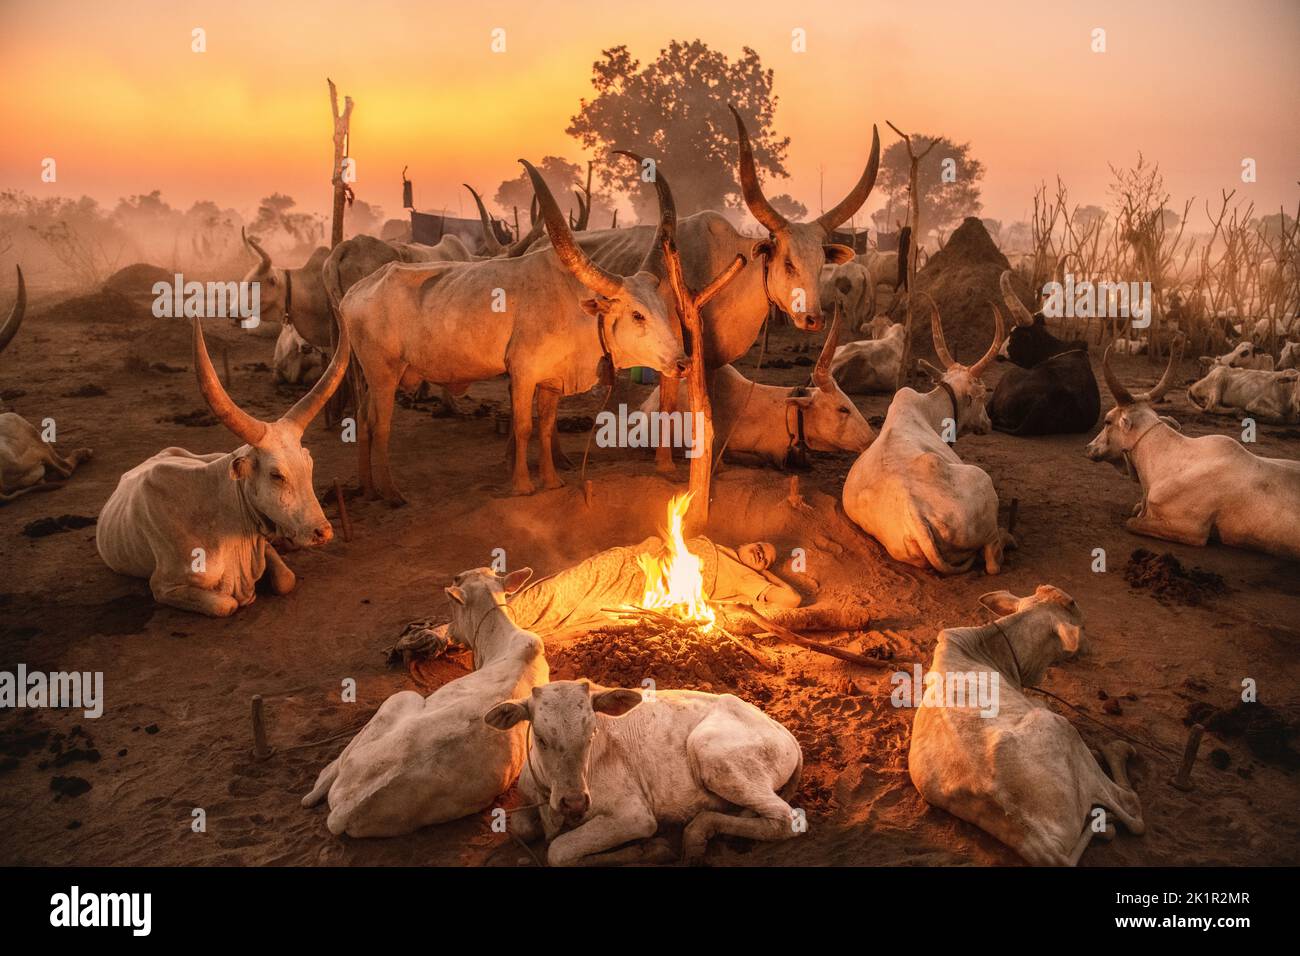 Cattle crowding round a fire. South Sudan: THESE STUNNING images show the incredible bond between the Mundari people and their cattle in South Sudan. Stock Photo